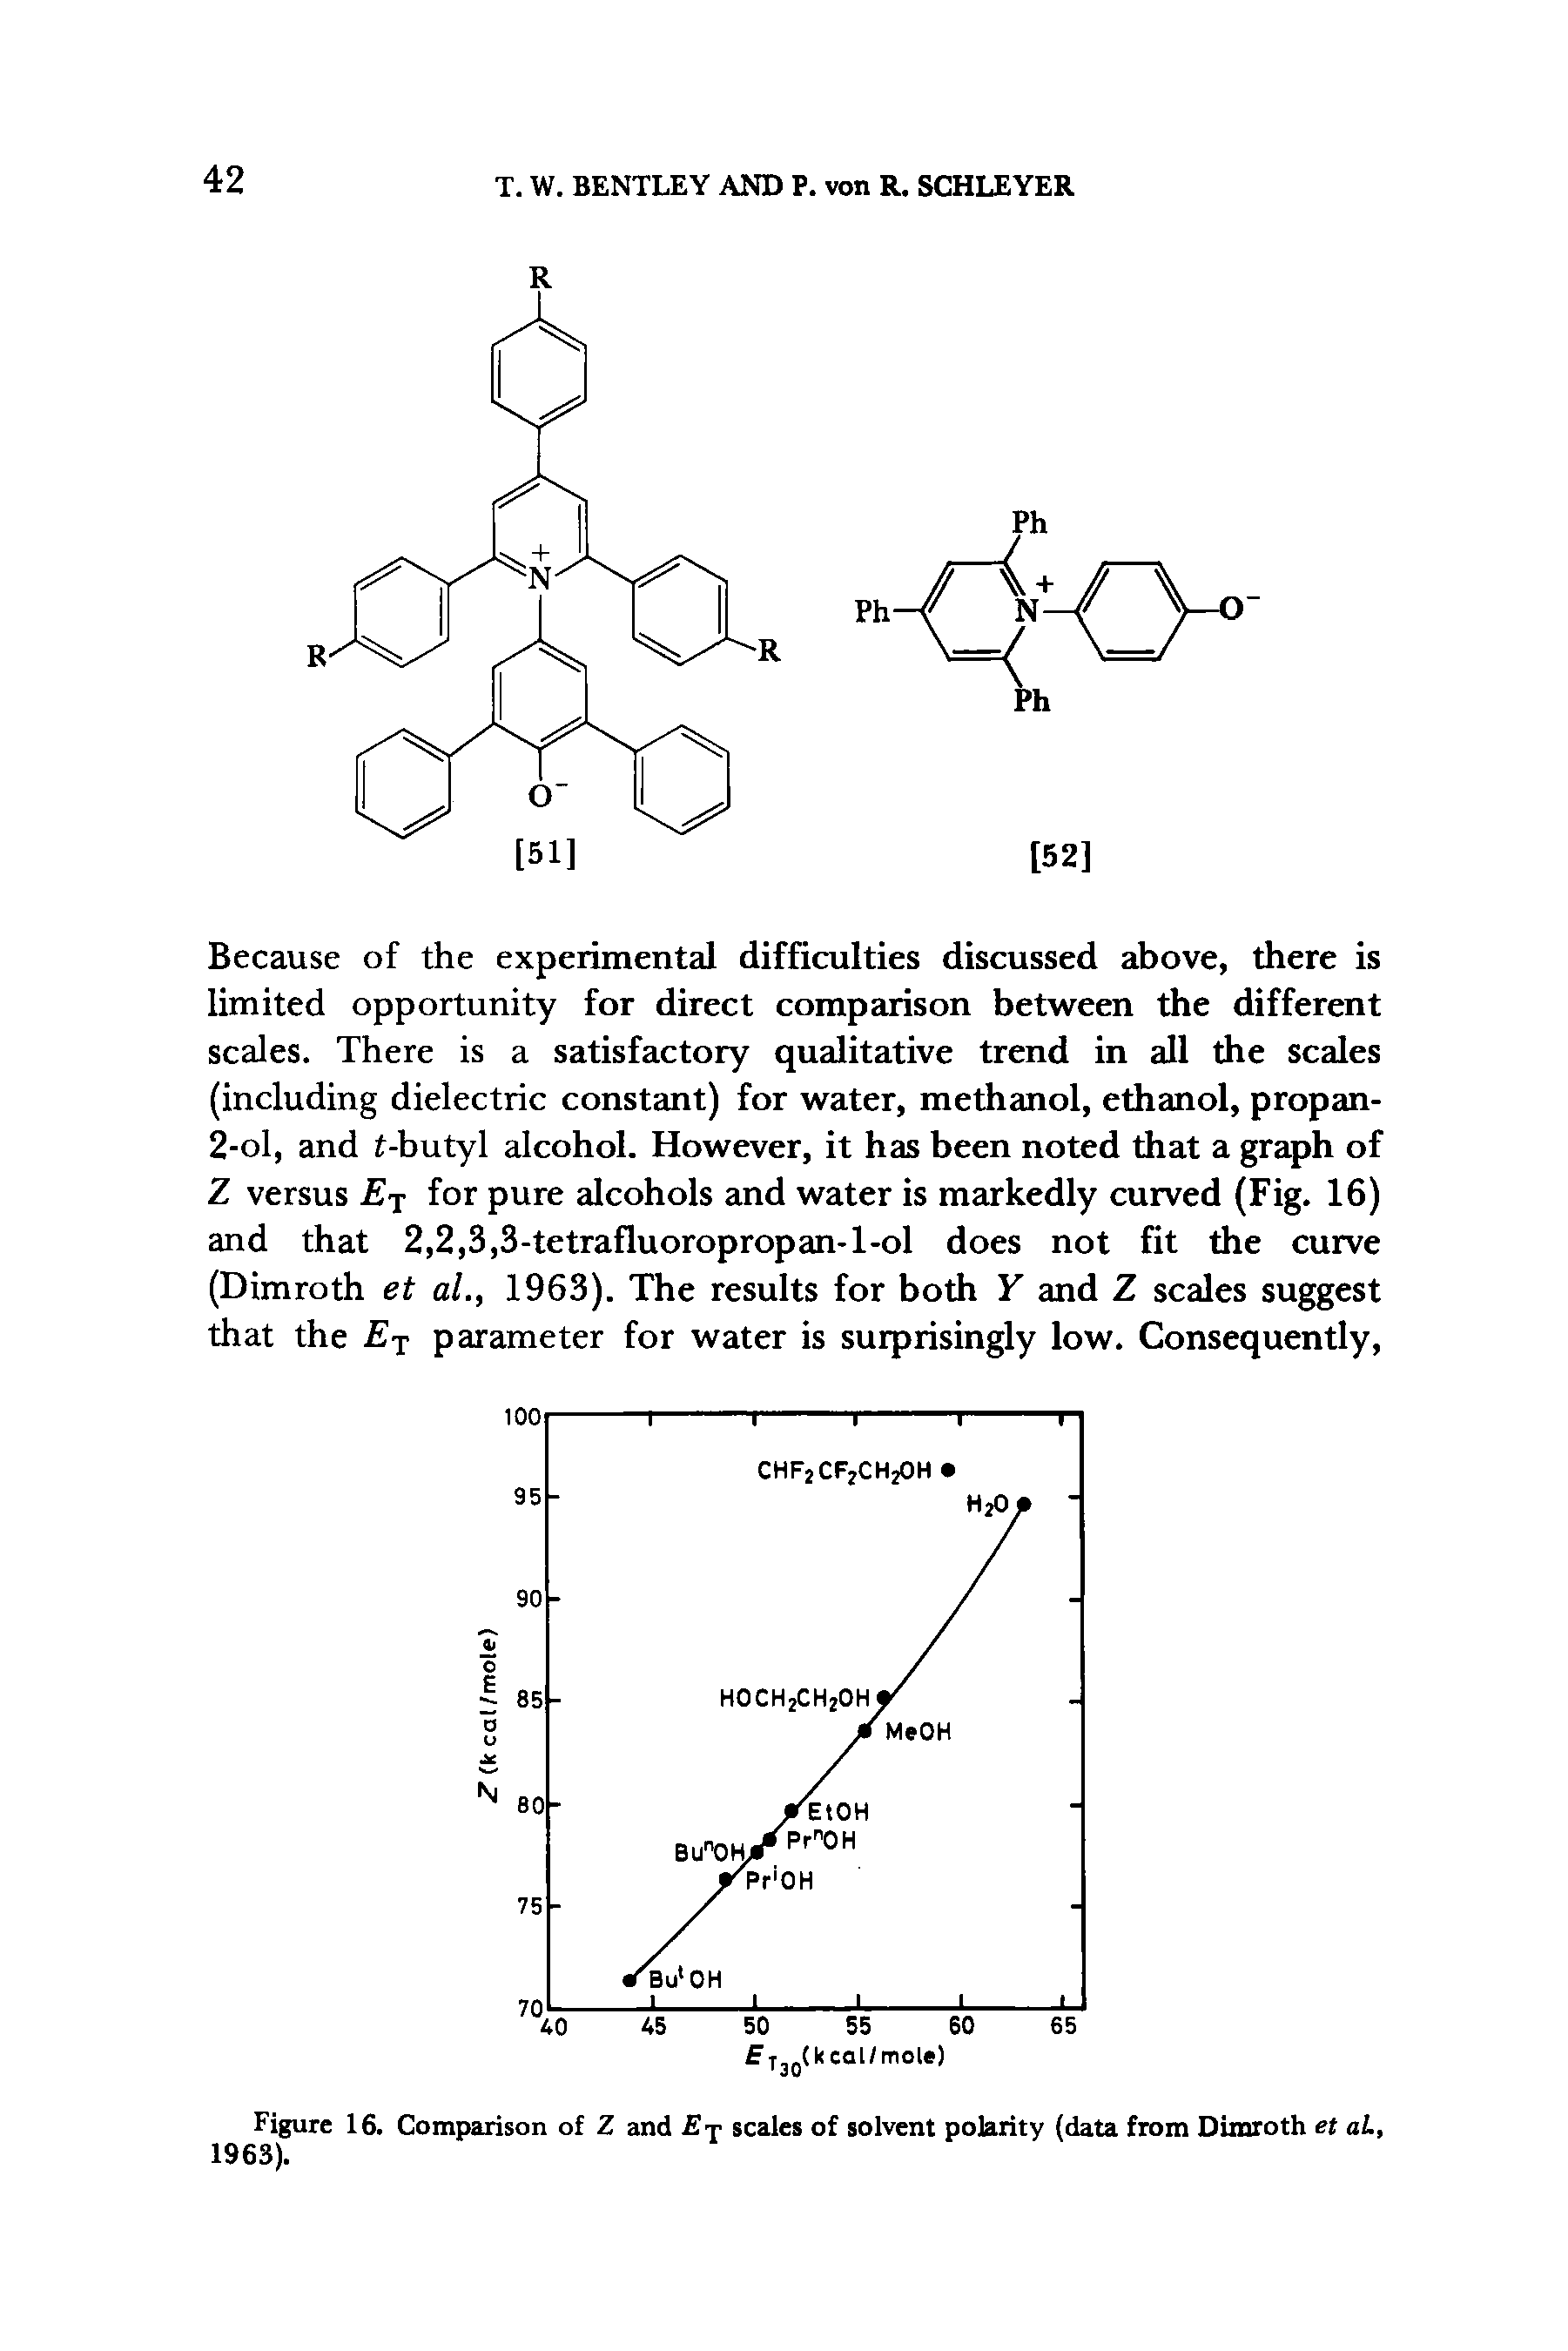 Figure 16. Comparison of Z and Ej scales of solvent polarity (data from Dimroth et aL, 1963).